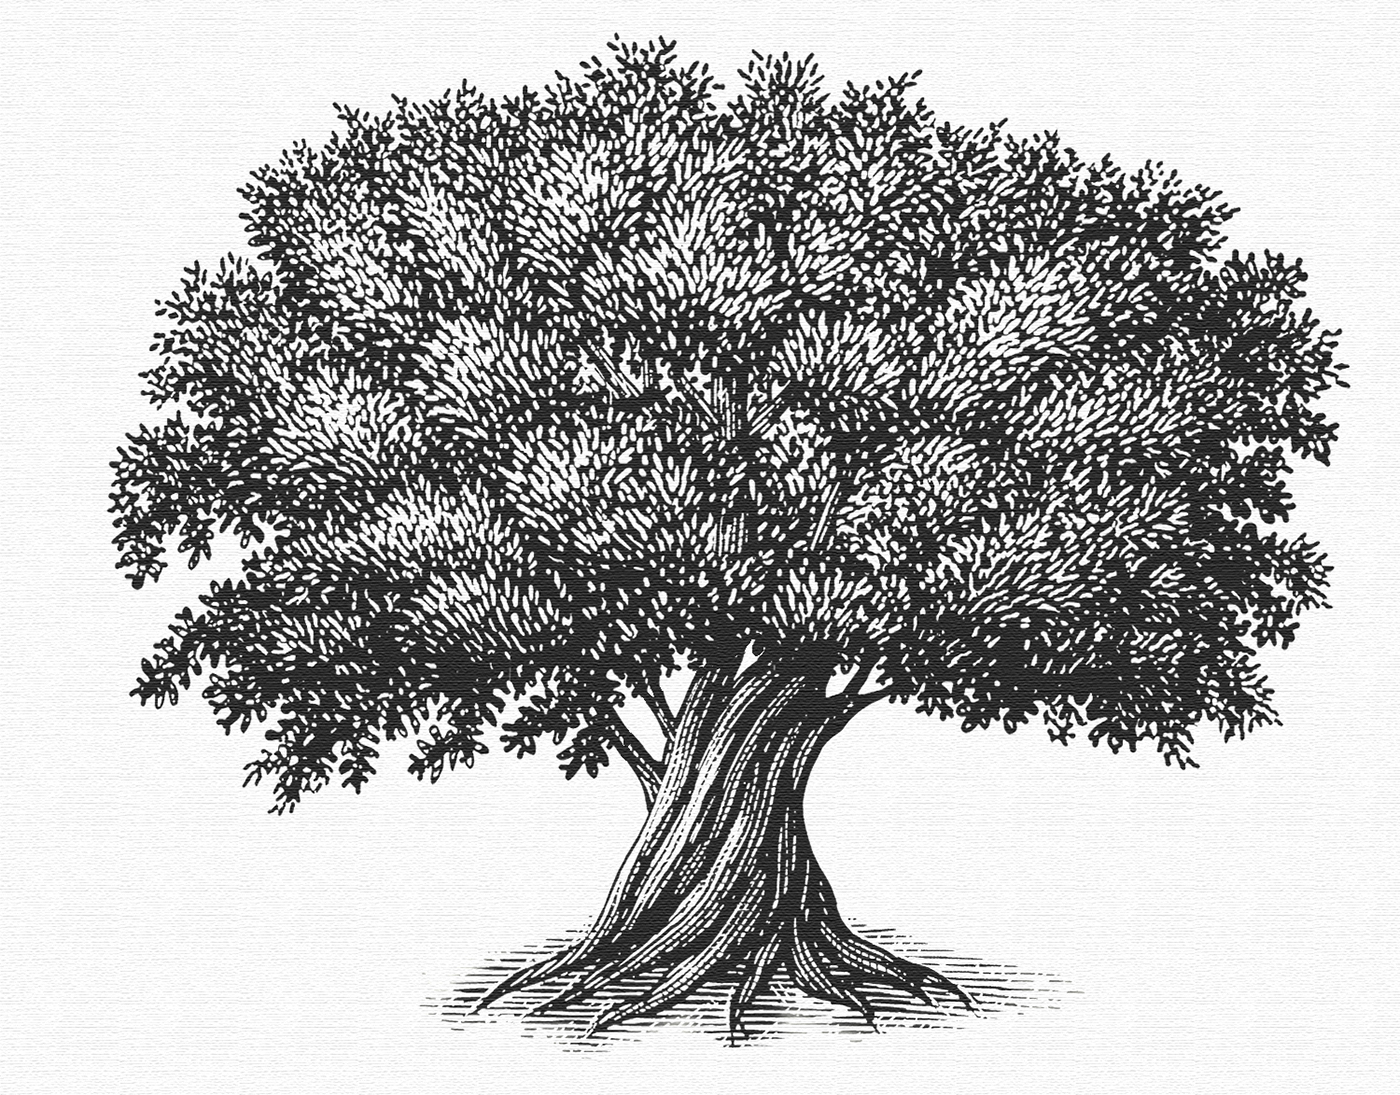 Sycamore Tree Sketch at Explore collection of